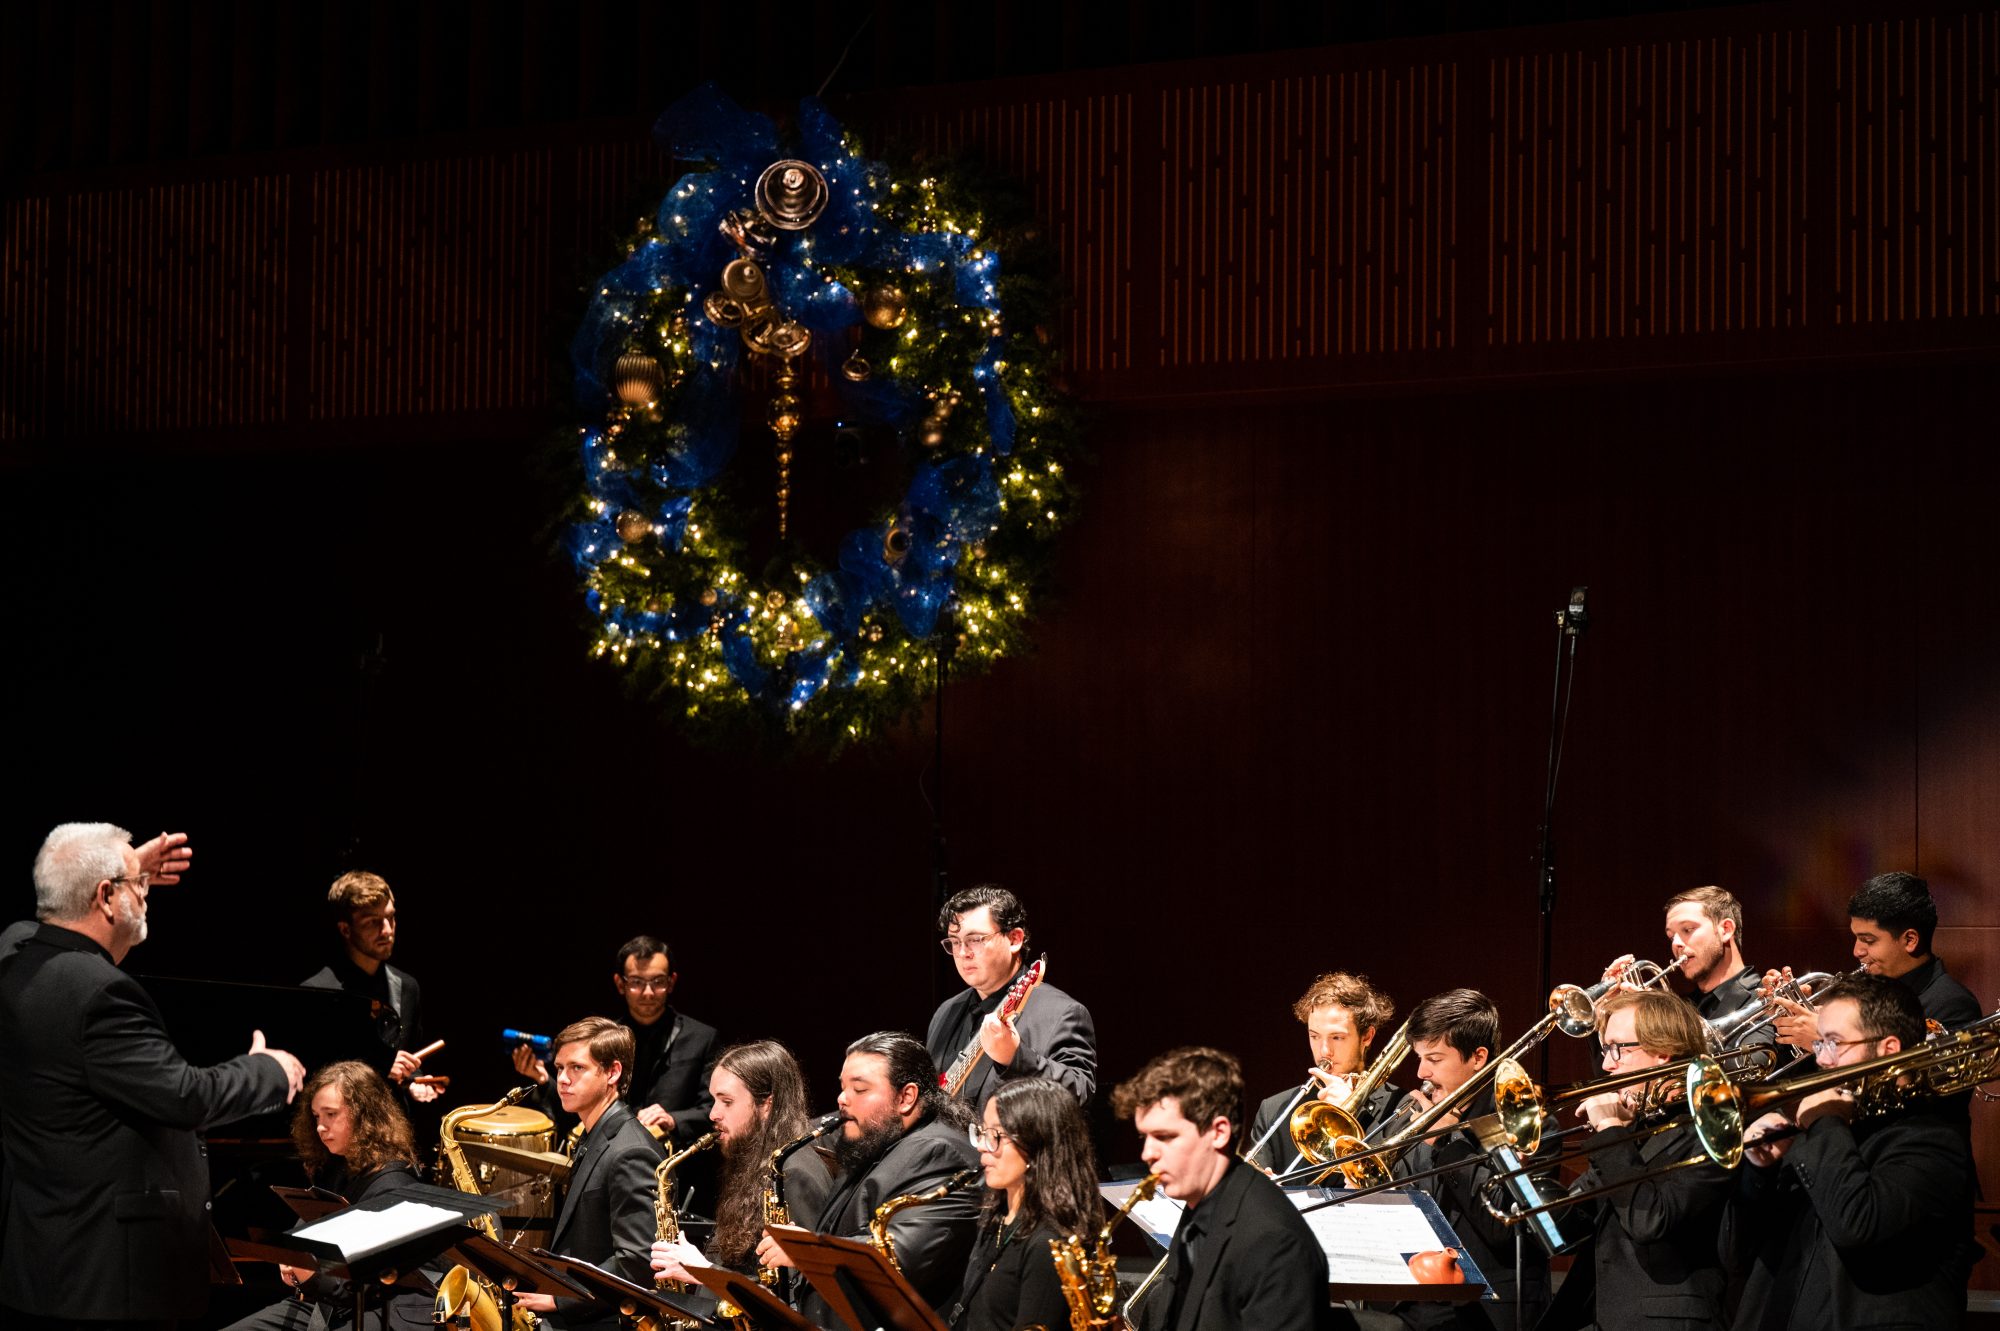 A musical band playing under a large garland wreath.